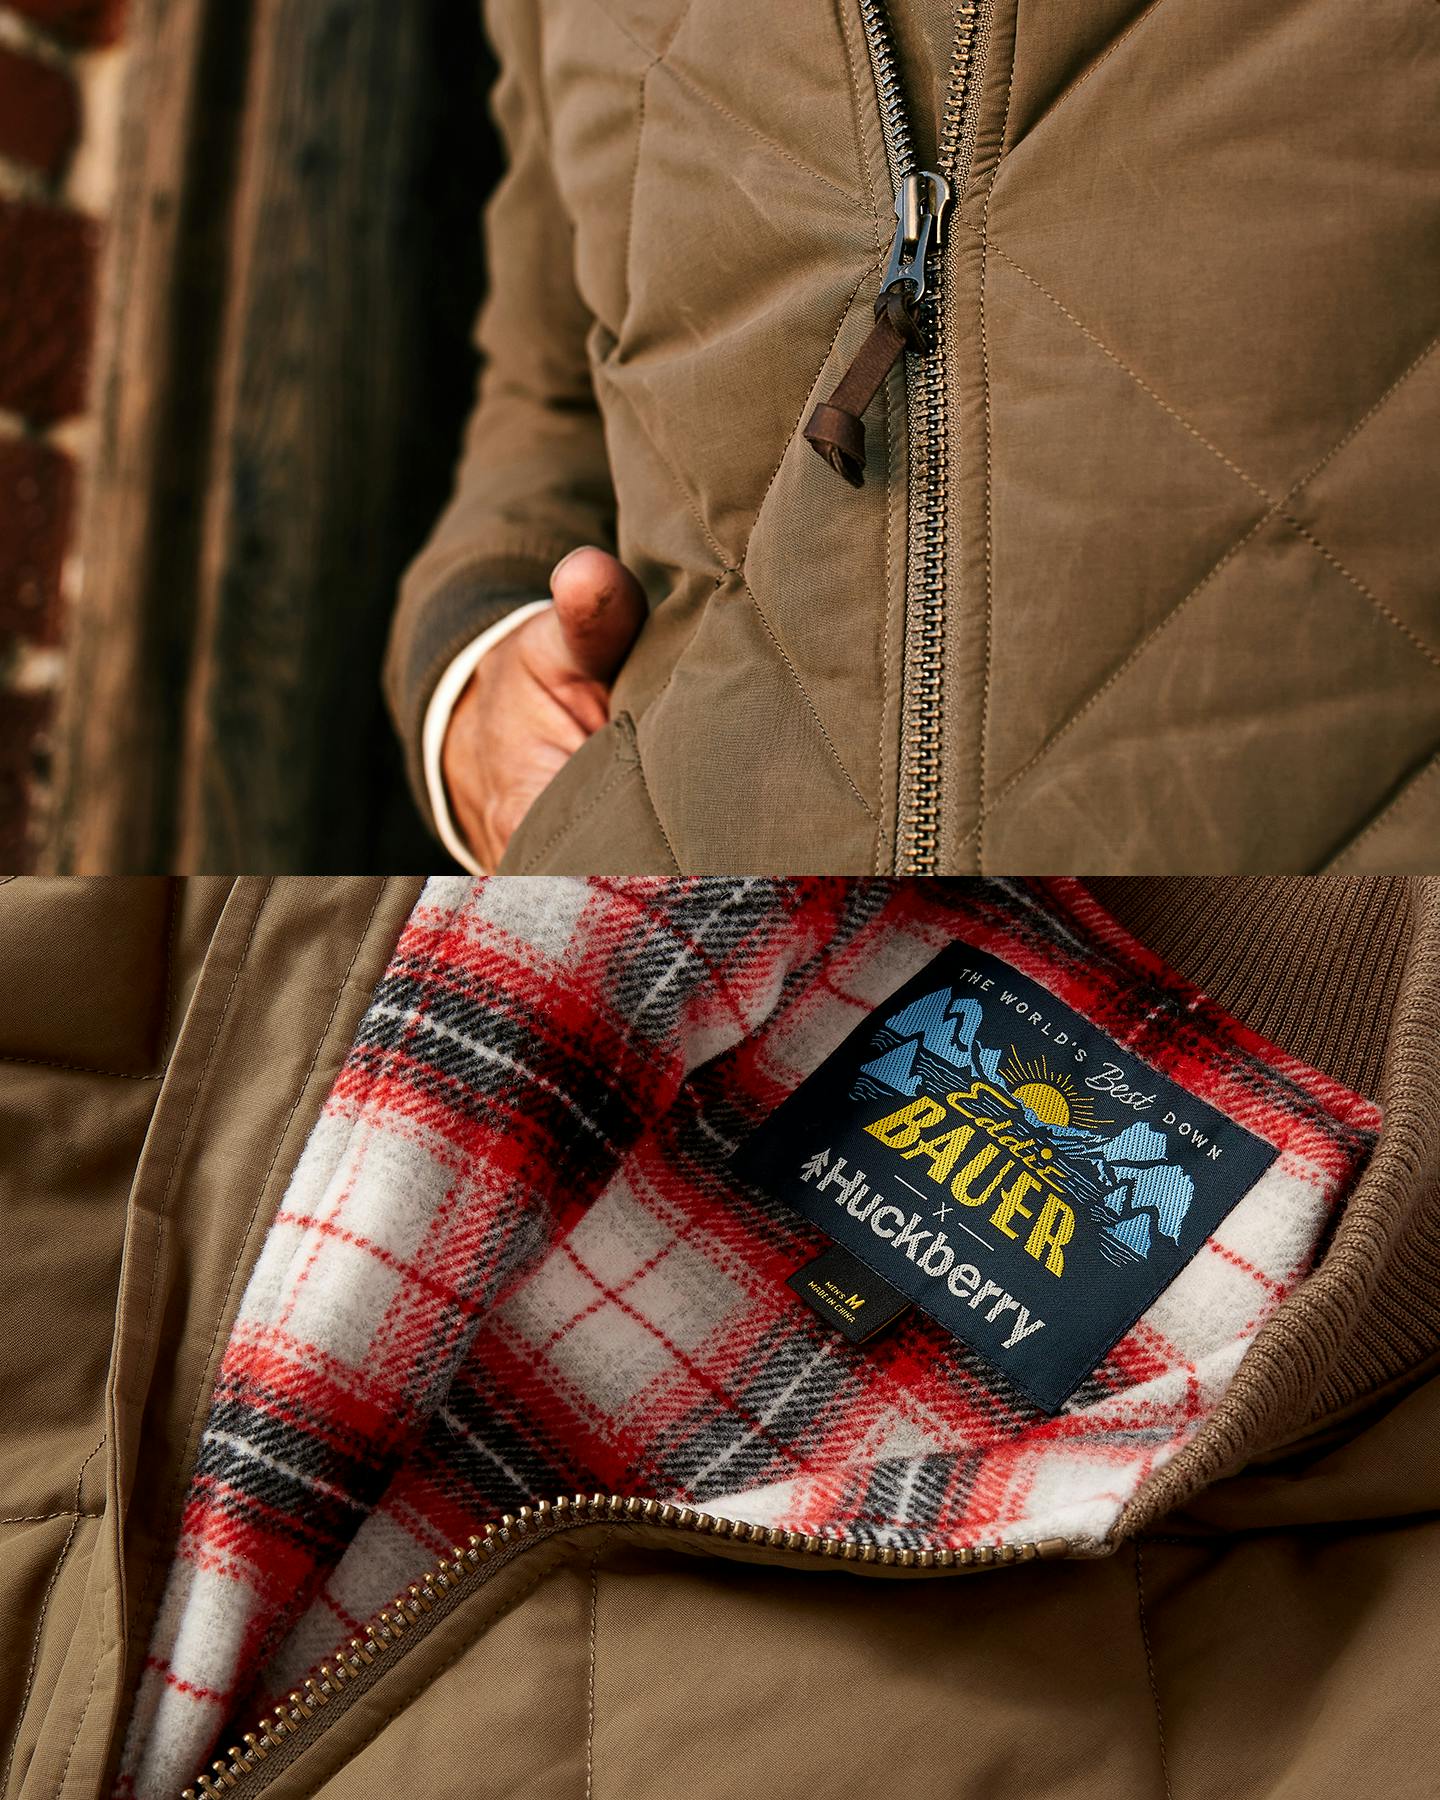 Detail shots of plaid jacket lining and label inside jacket